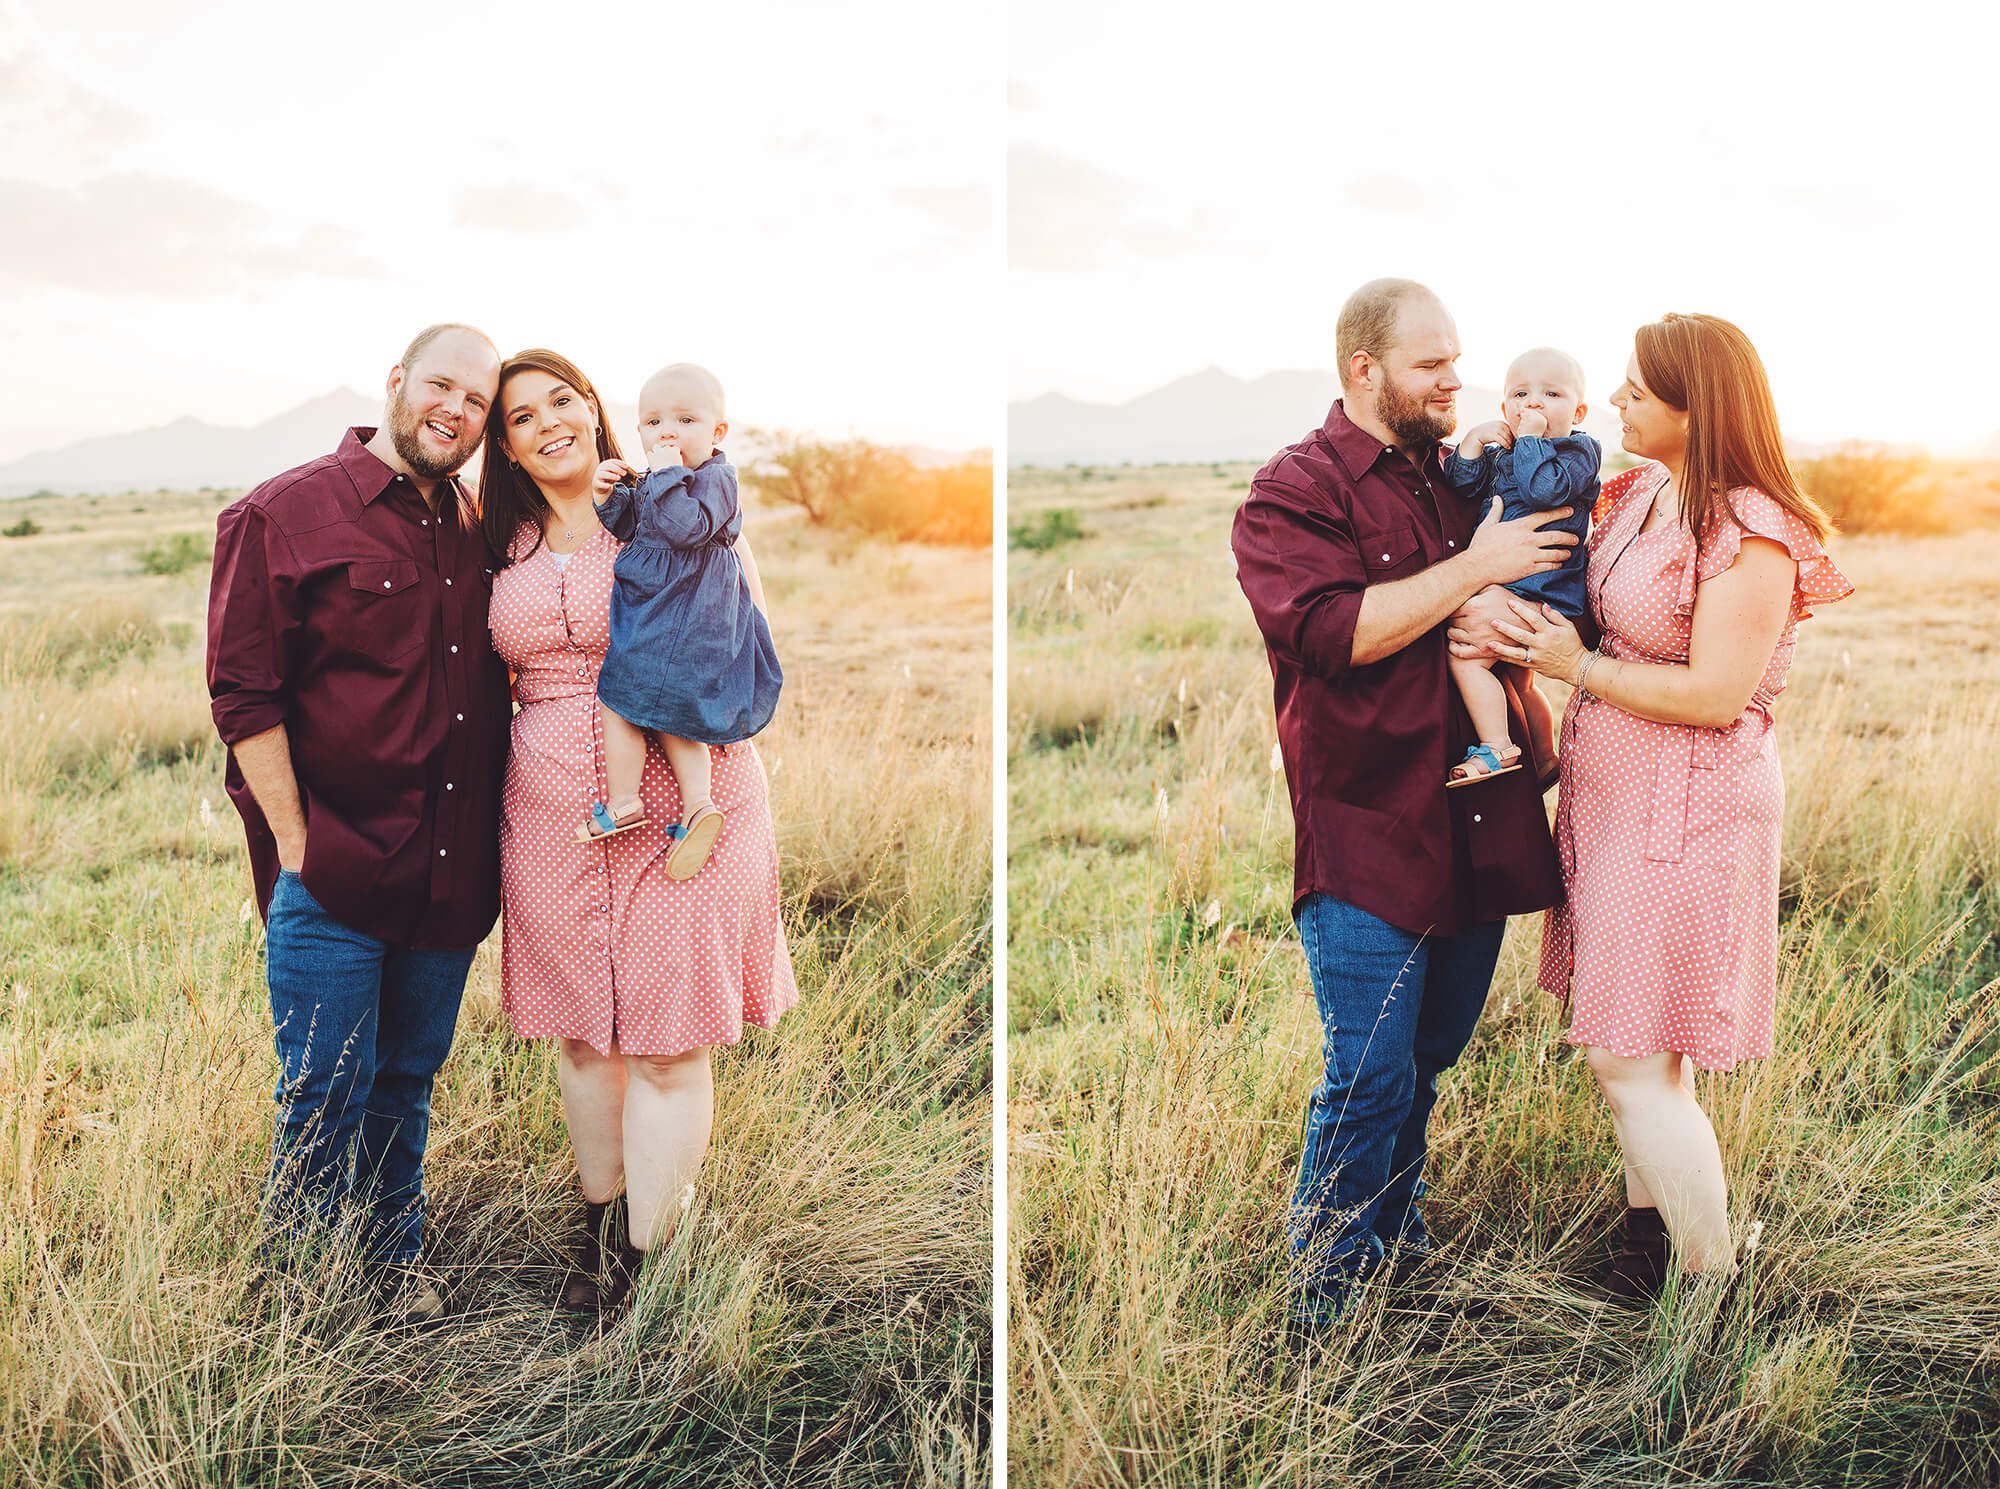 Sweet, sweet family! Beautiful sunset and photos full of love for the Tawney Family.